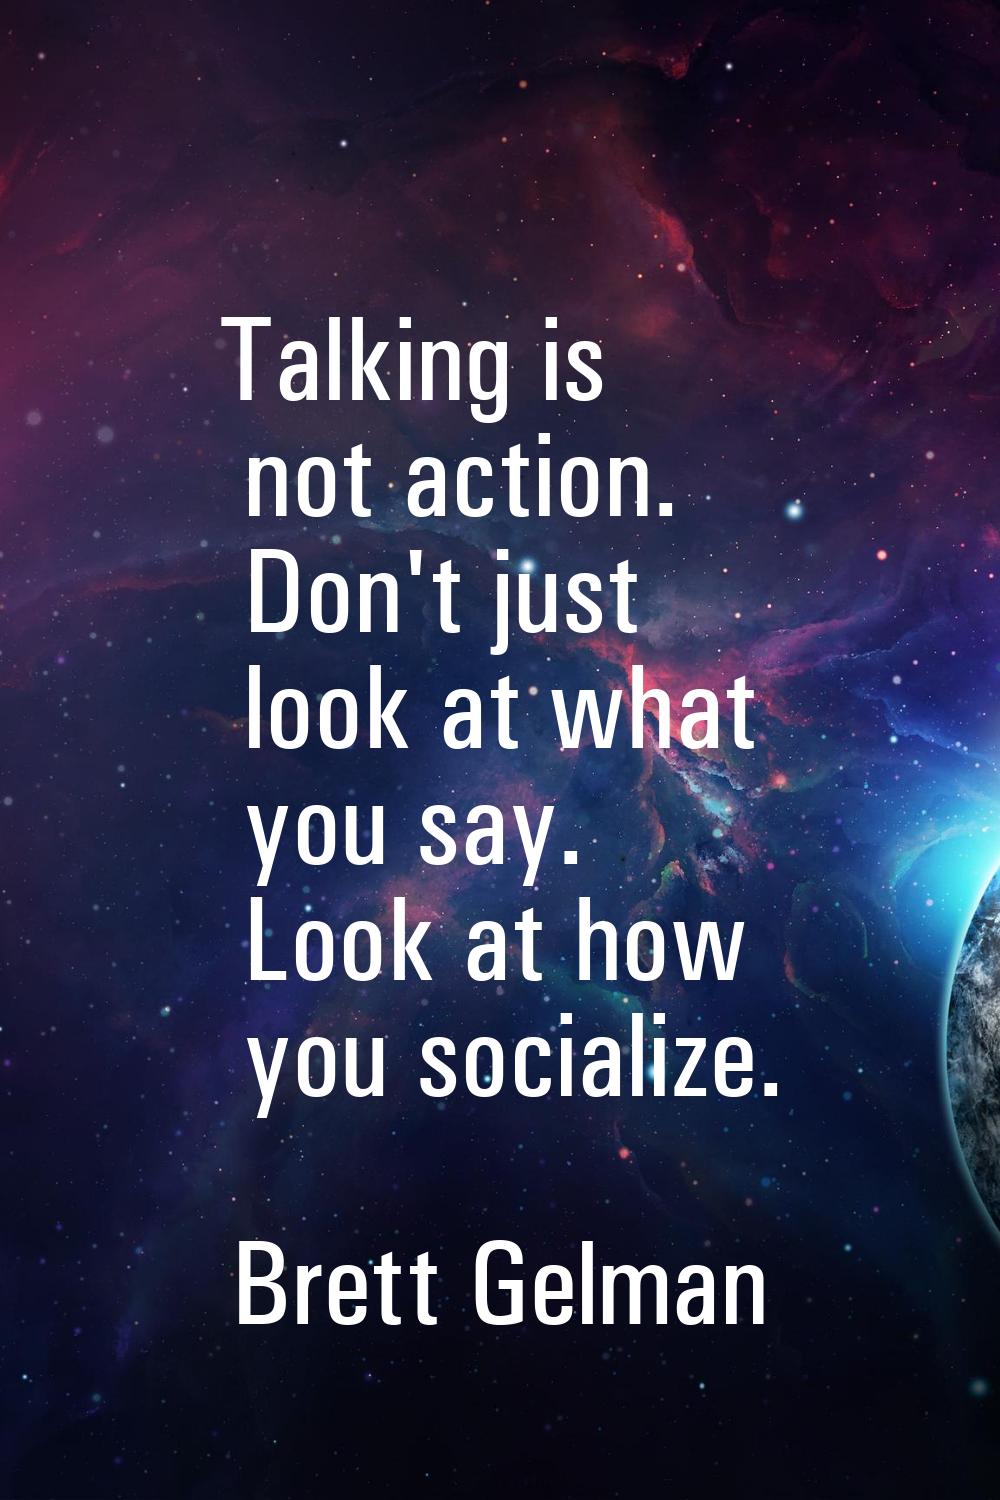 Talking is not action. Don't just look at what you say. Look at how you socialize.